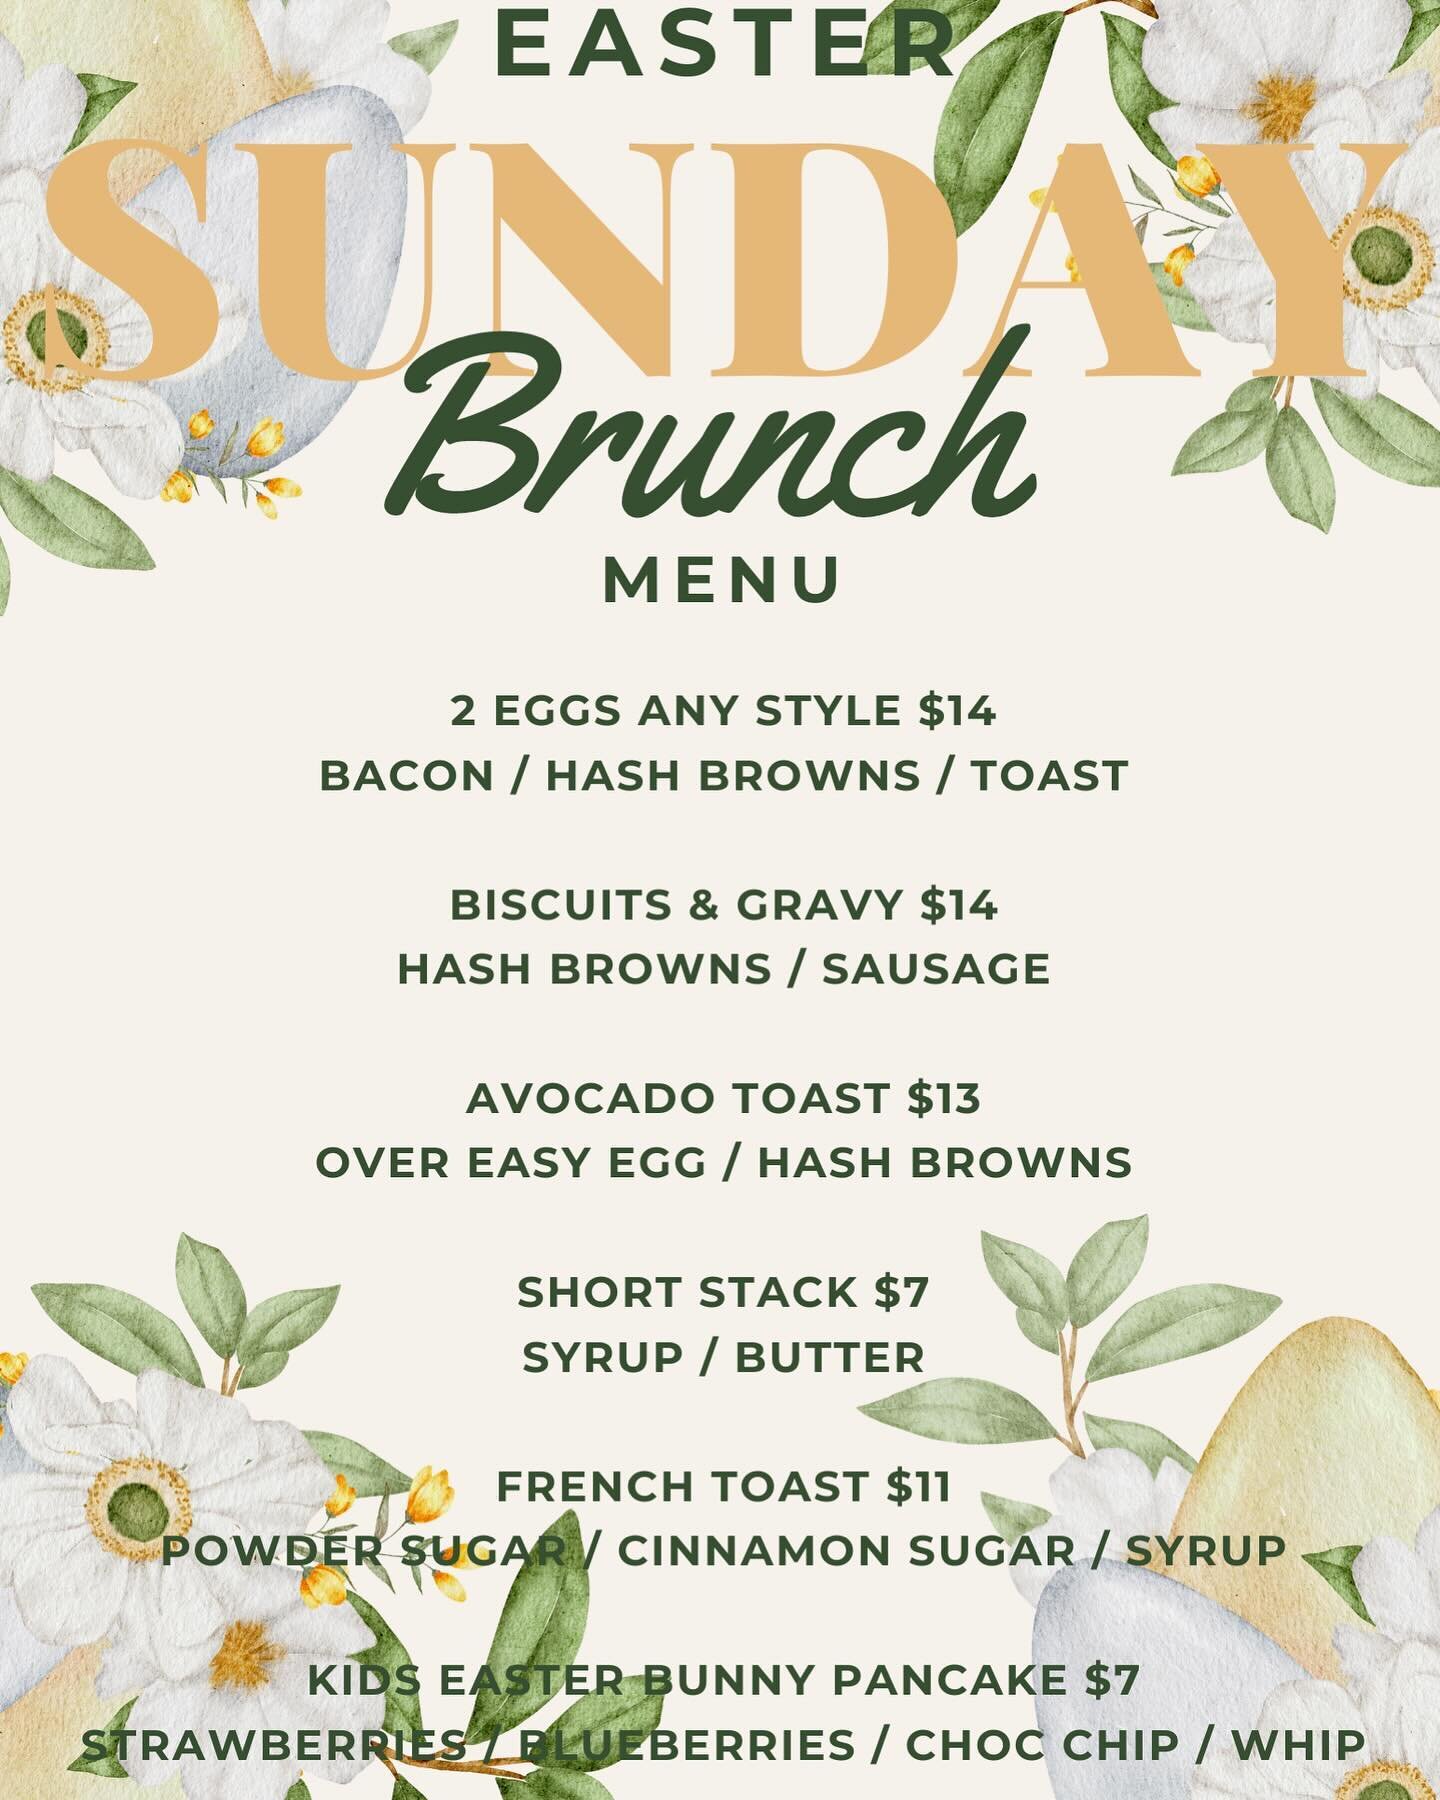 🐰 We can&rsquo;t wait for Easter weekend!! 🐰 Here&rsquo;s the weekend menu!! We&rsquo;re going to run this both Saturday and Sunday!! 🥞💐🍳 See yall this weekend!!